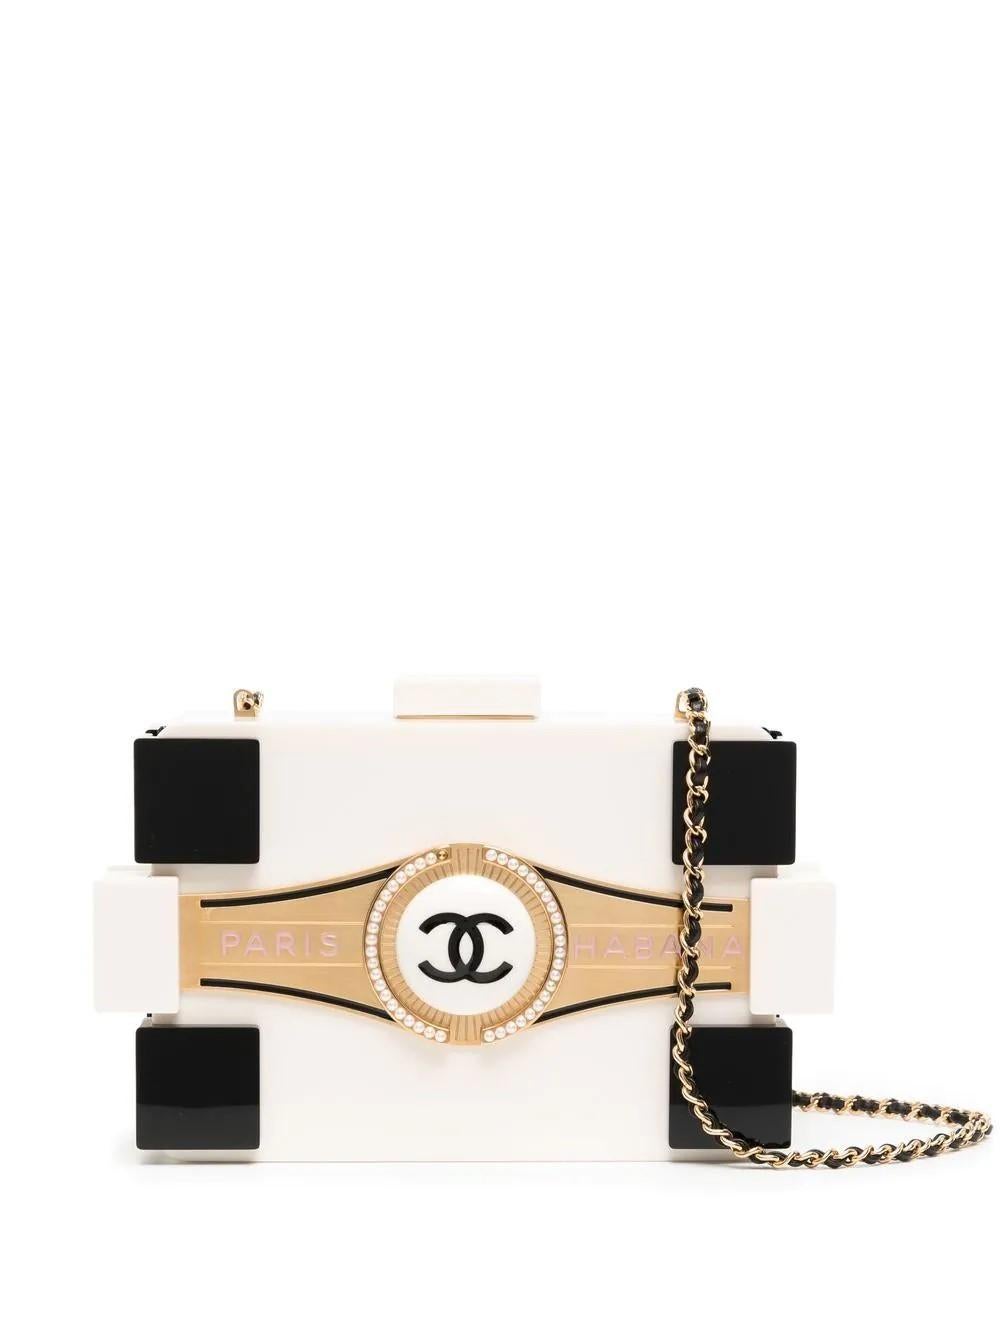 Karl Lagerfeld’s time at Chanel has gone down in history as one of the most important partnerships in fashion history. This iconic clutch from his final runway show is a collector's piece that has been maintained in mint condition. The Cuban